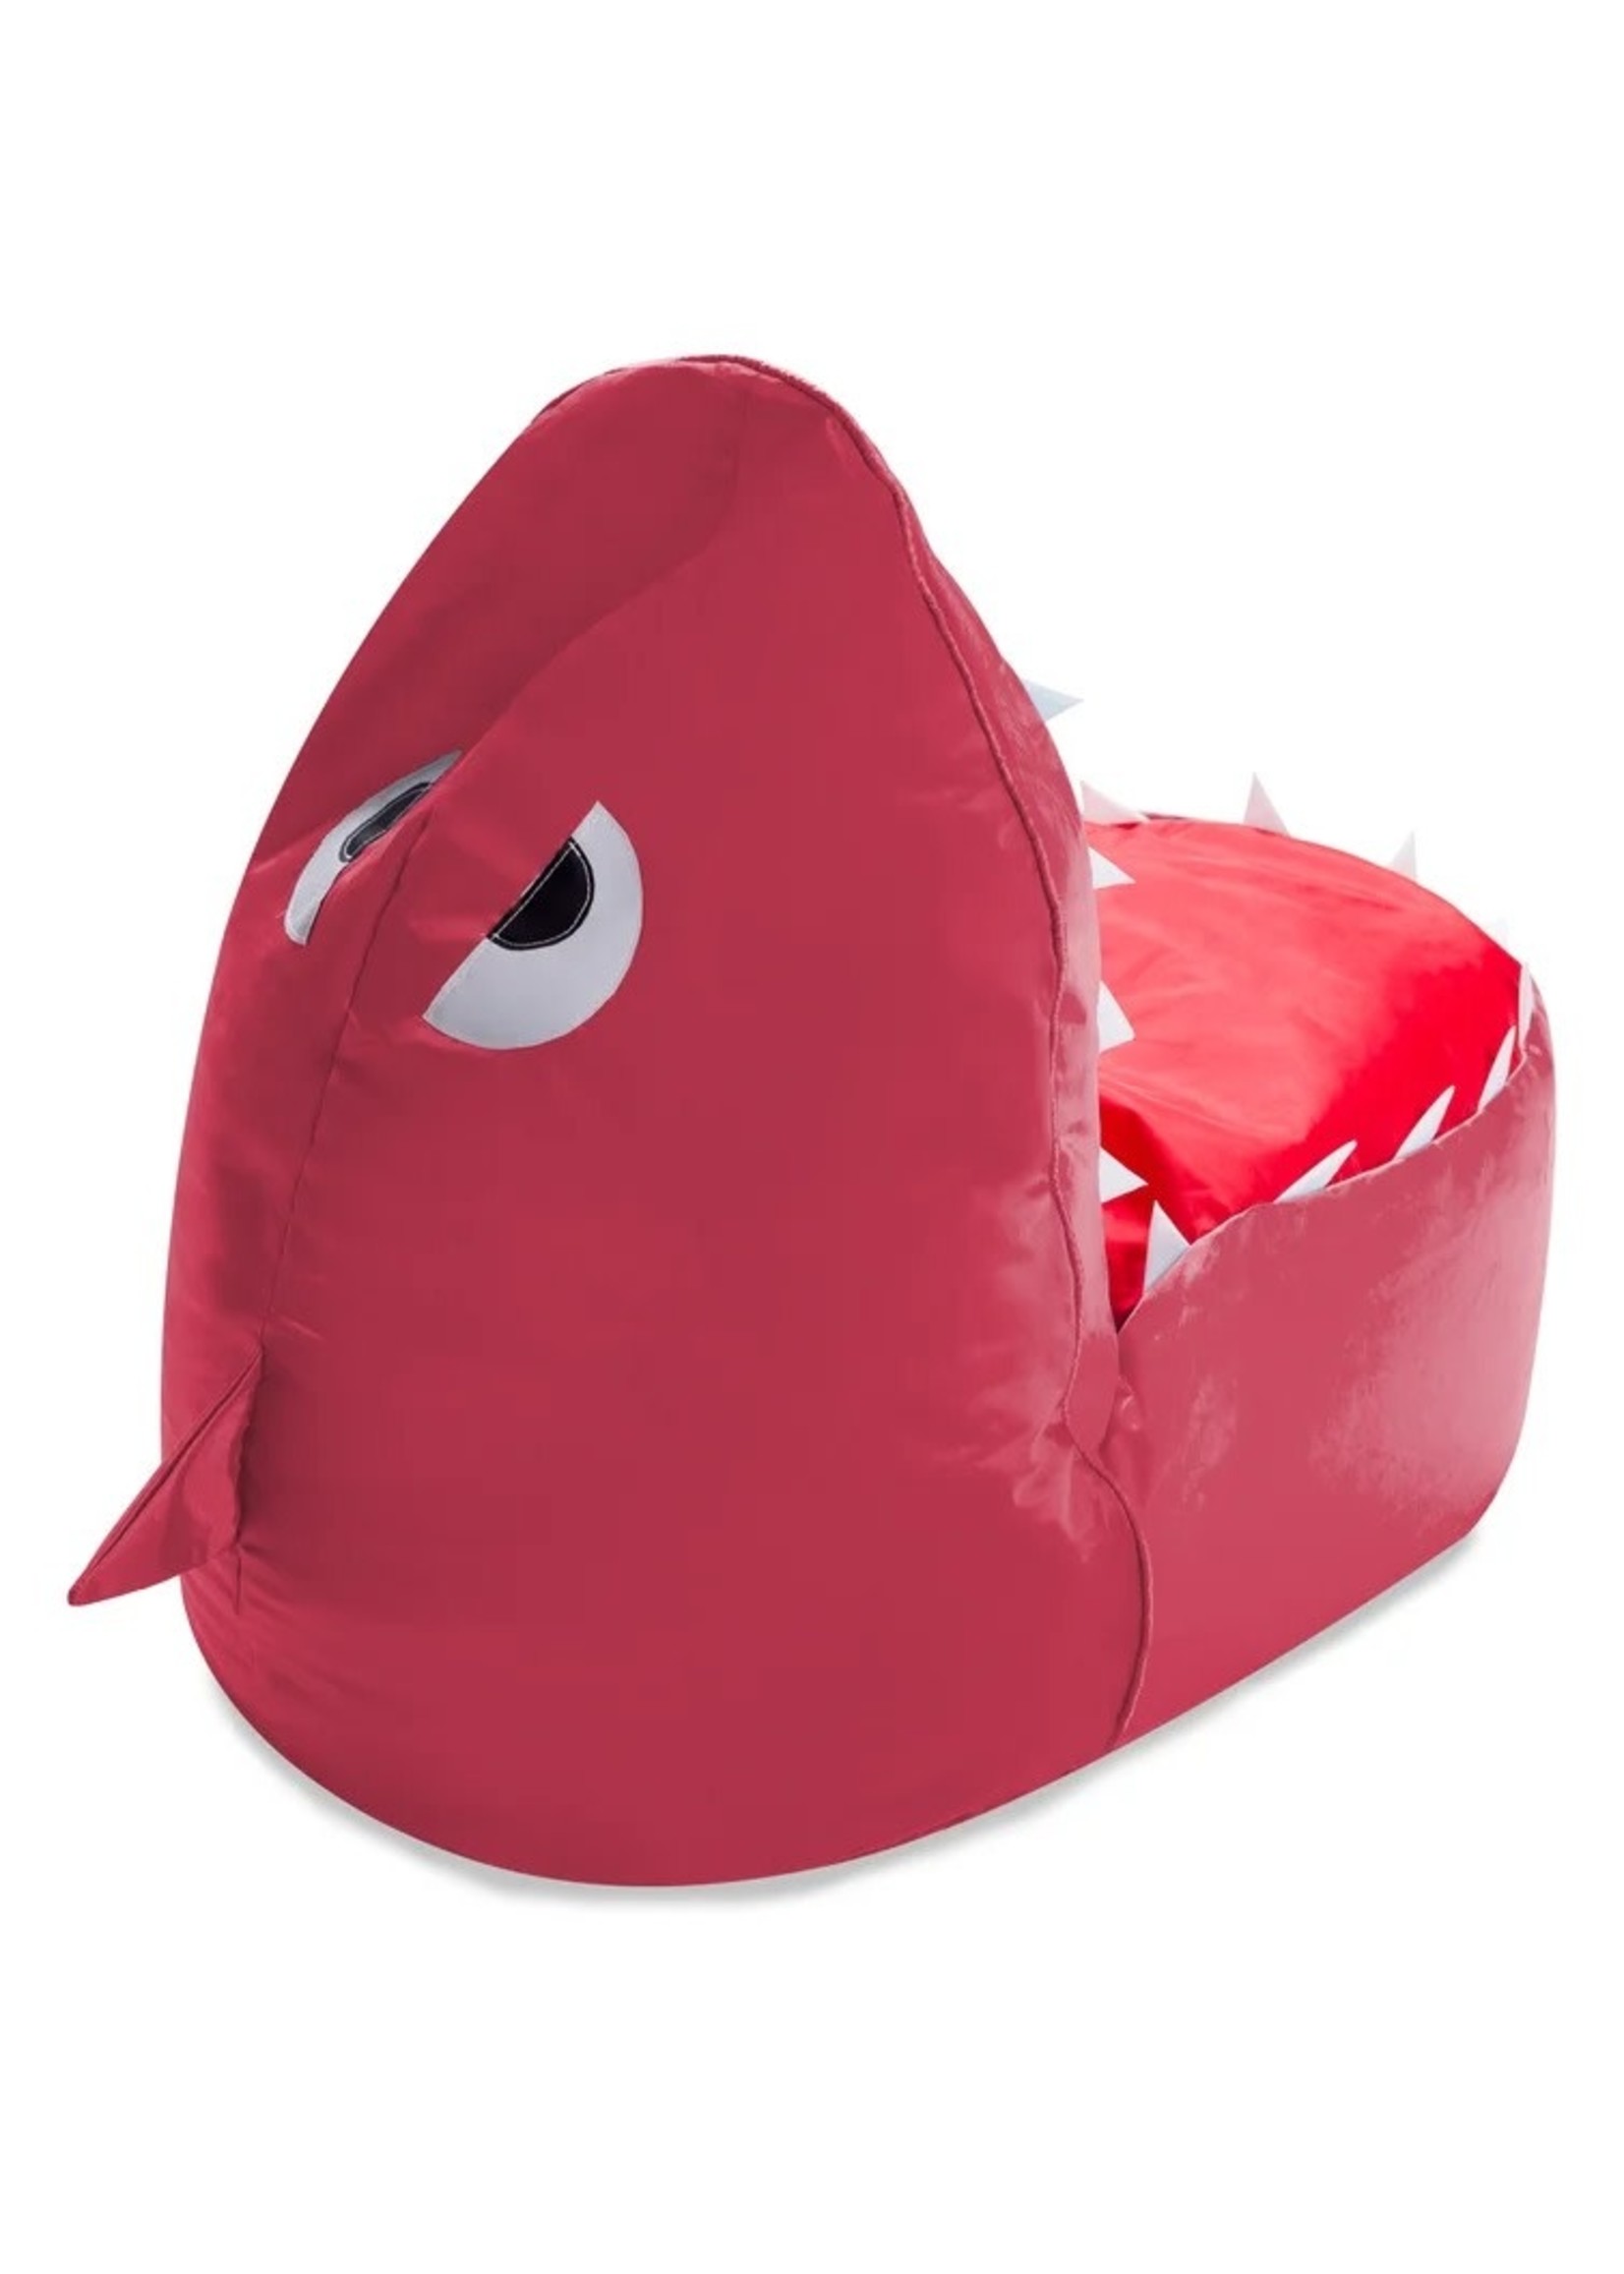 *COVER ONLY - Shark Stuffed Animal Bean Bag Cover For Kids - Large 22" - Red